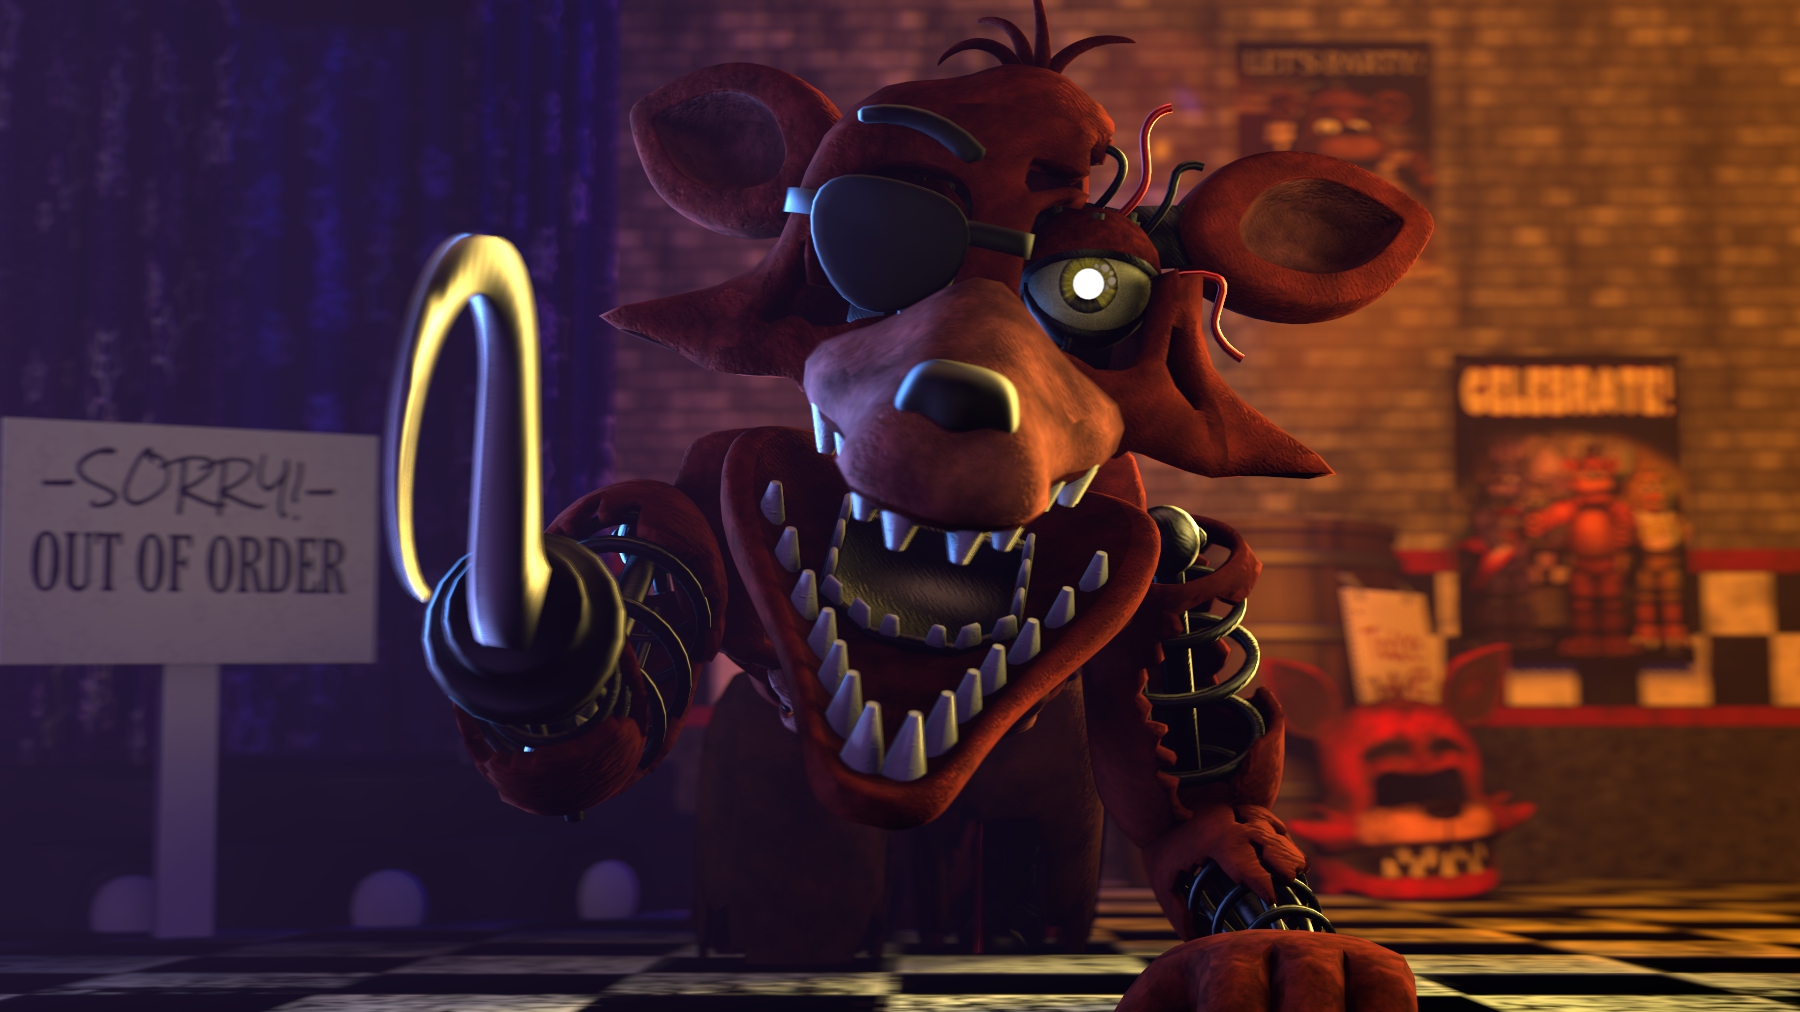 withered foxy jumpscare pose remake by NathanNiellYT on DeviantArt